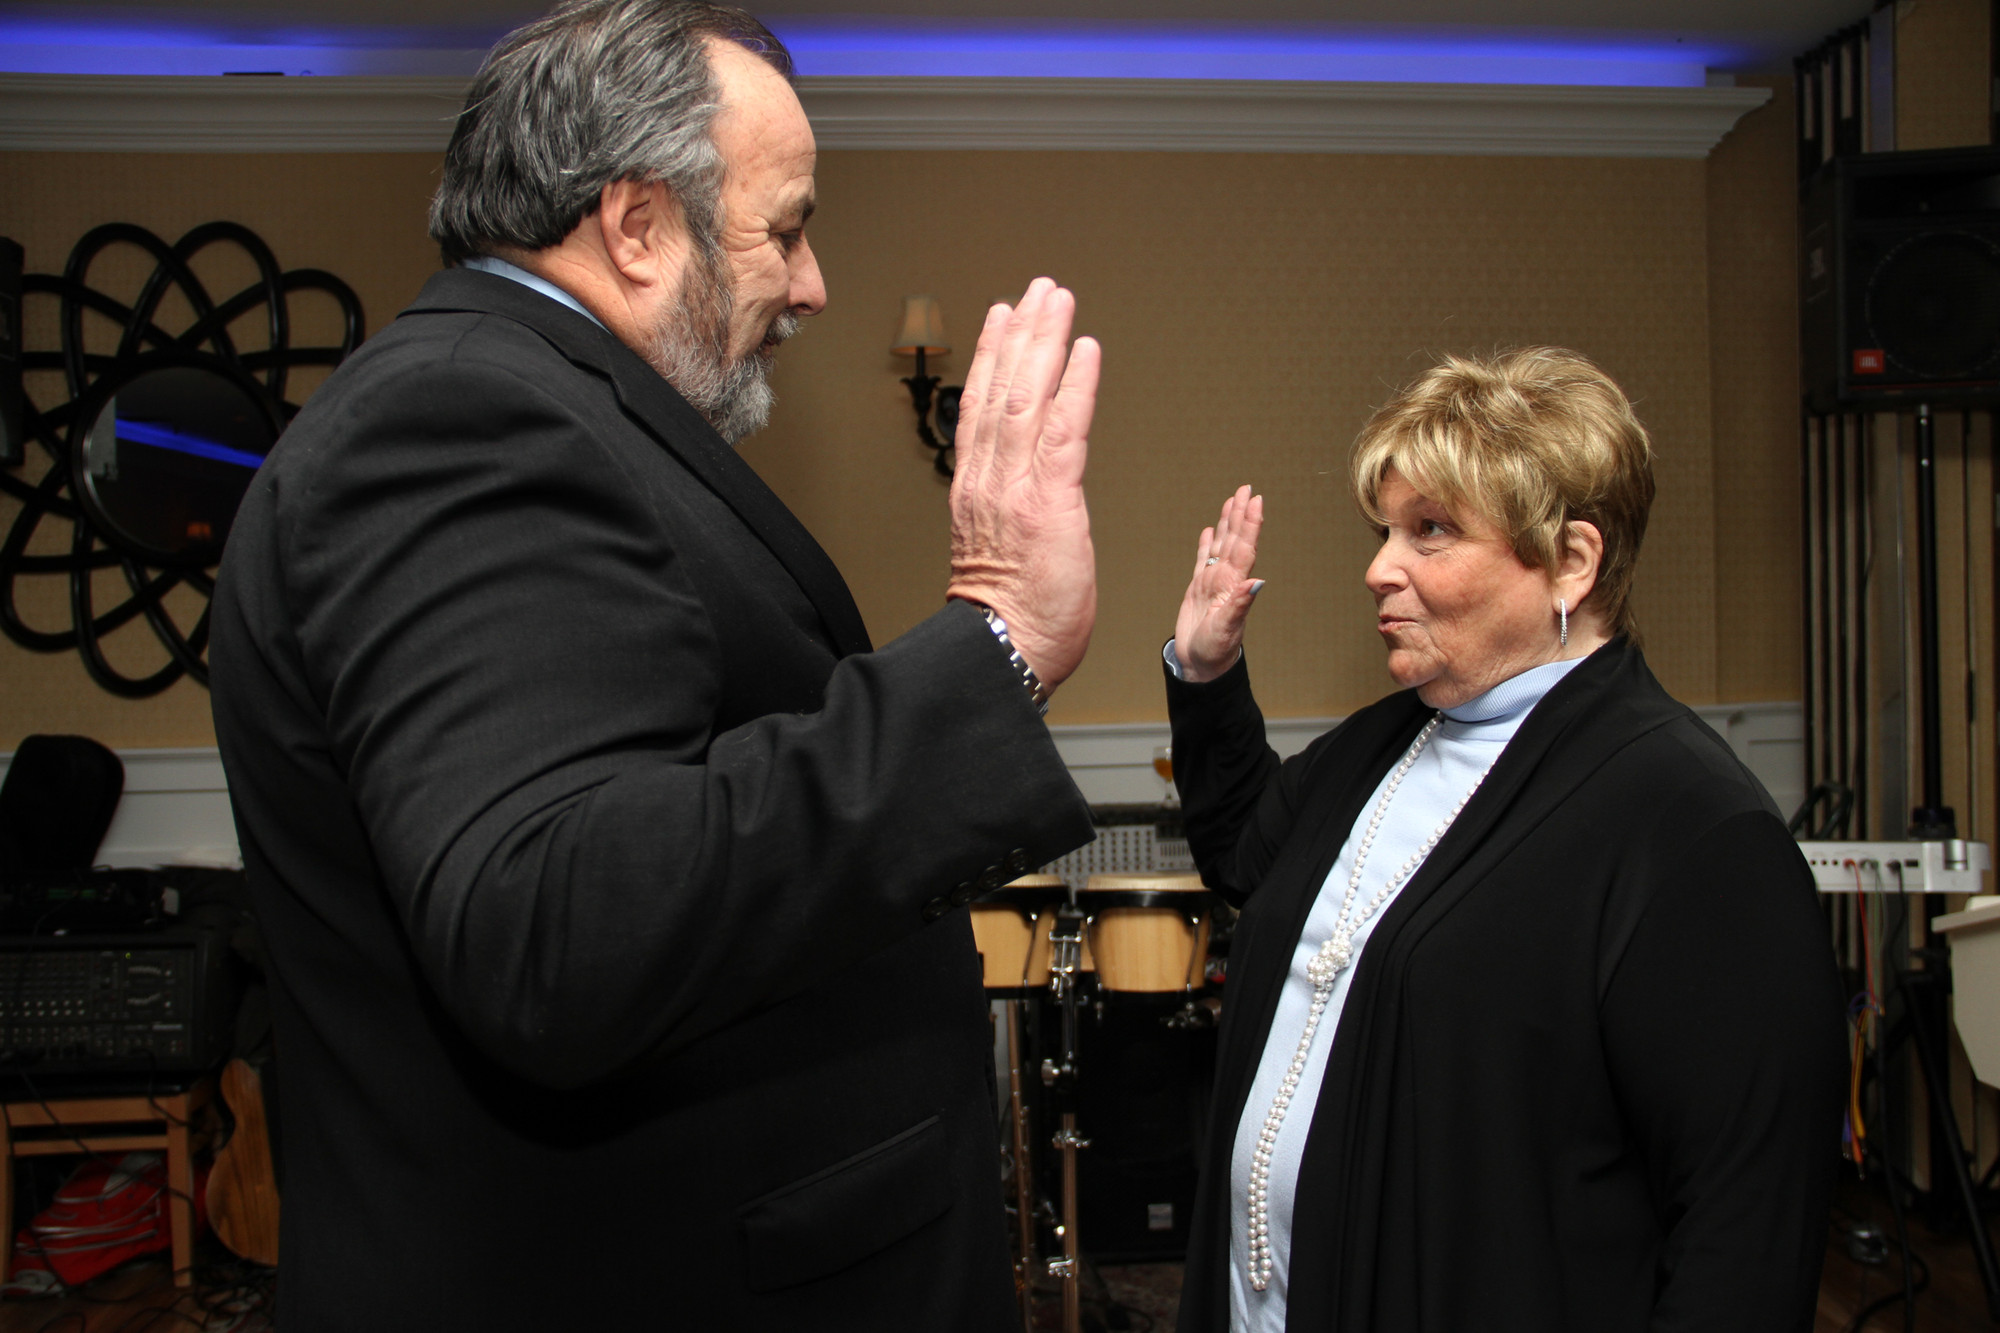 Barbara Goldfeder, the new chamber president, was sworn in by Mayor Murray.